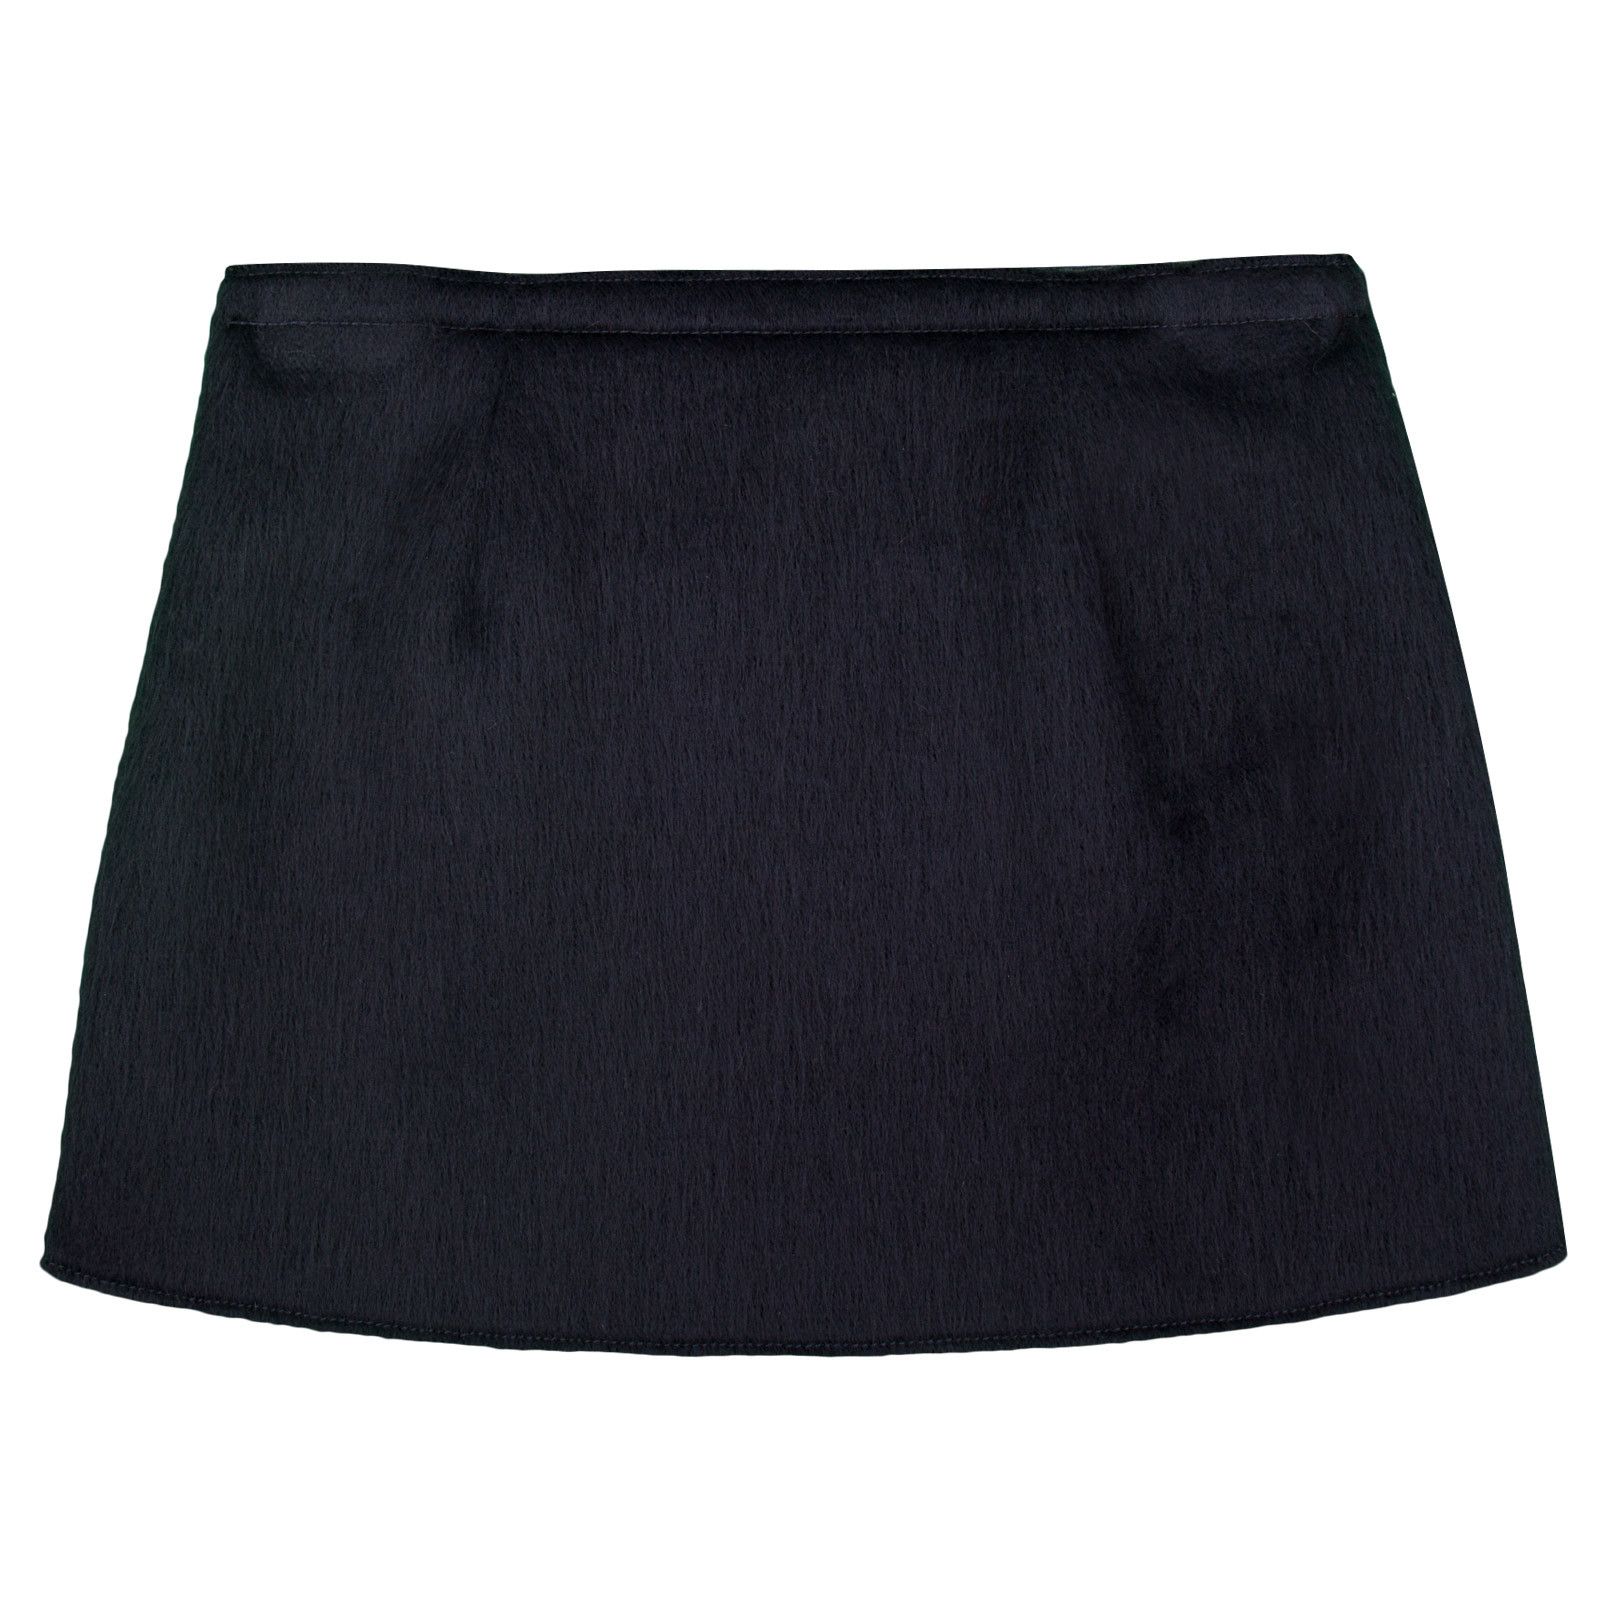 Girls Navy Blue Pasted Synthetic Fur Acrylic Skirt - CÉMAROSE | Children's Fashion Store - 1